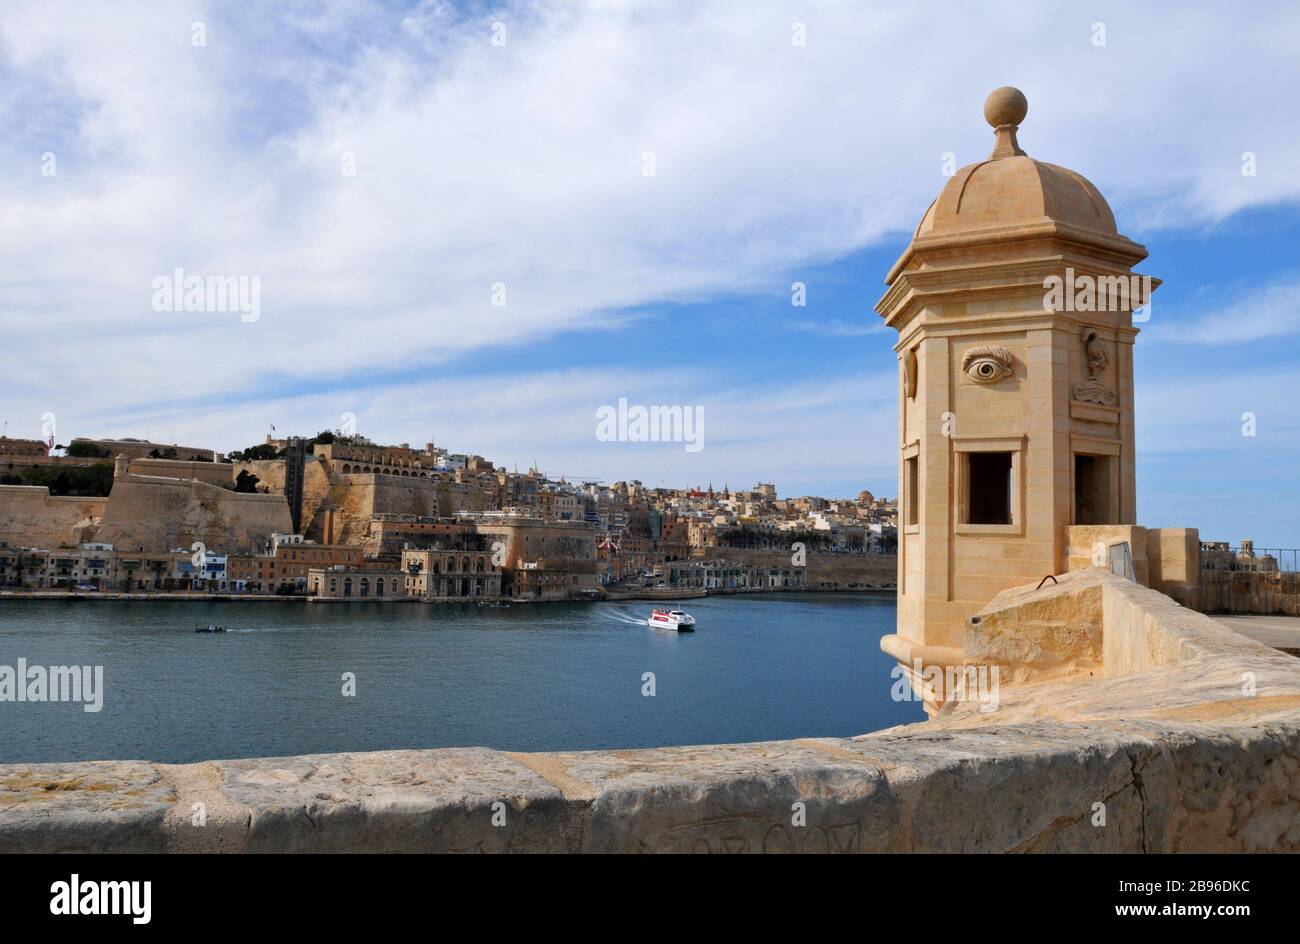 The historic watchtower (vedette) at Gardjola Gardens in Senglea, Malta offers a view across the Grand Harbour to the capital, Valletta. Stock Photo